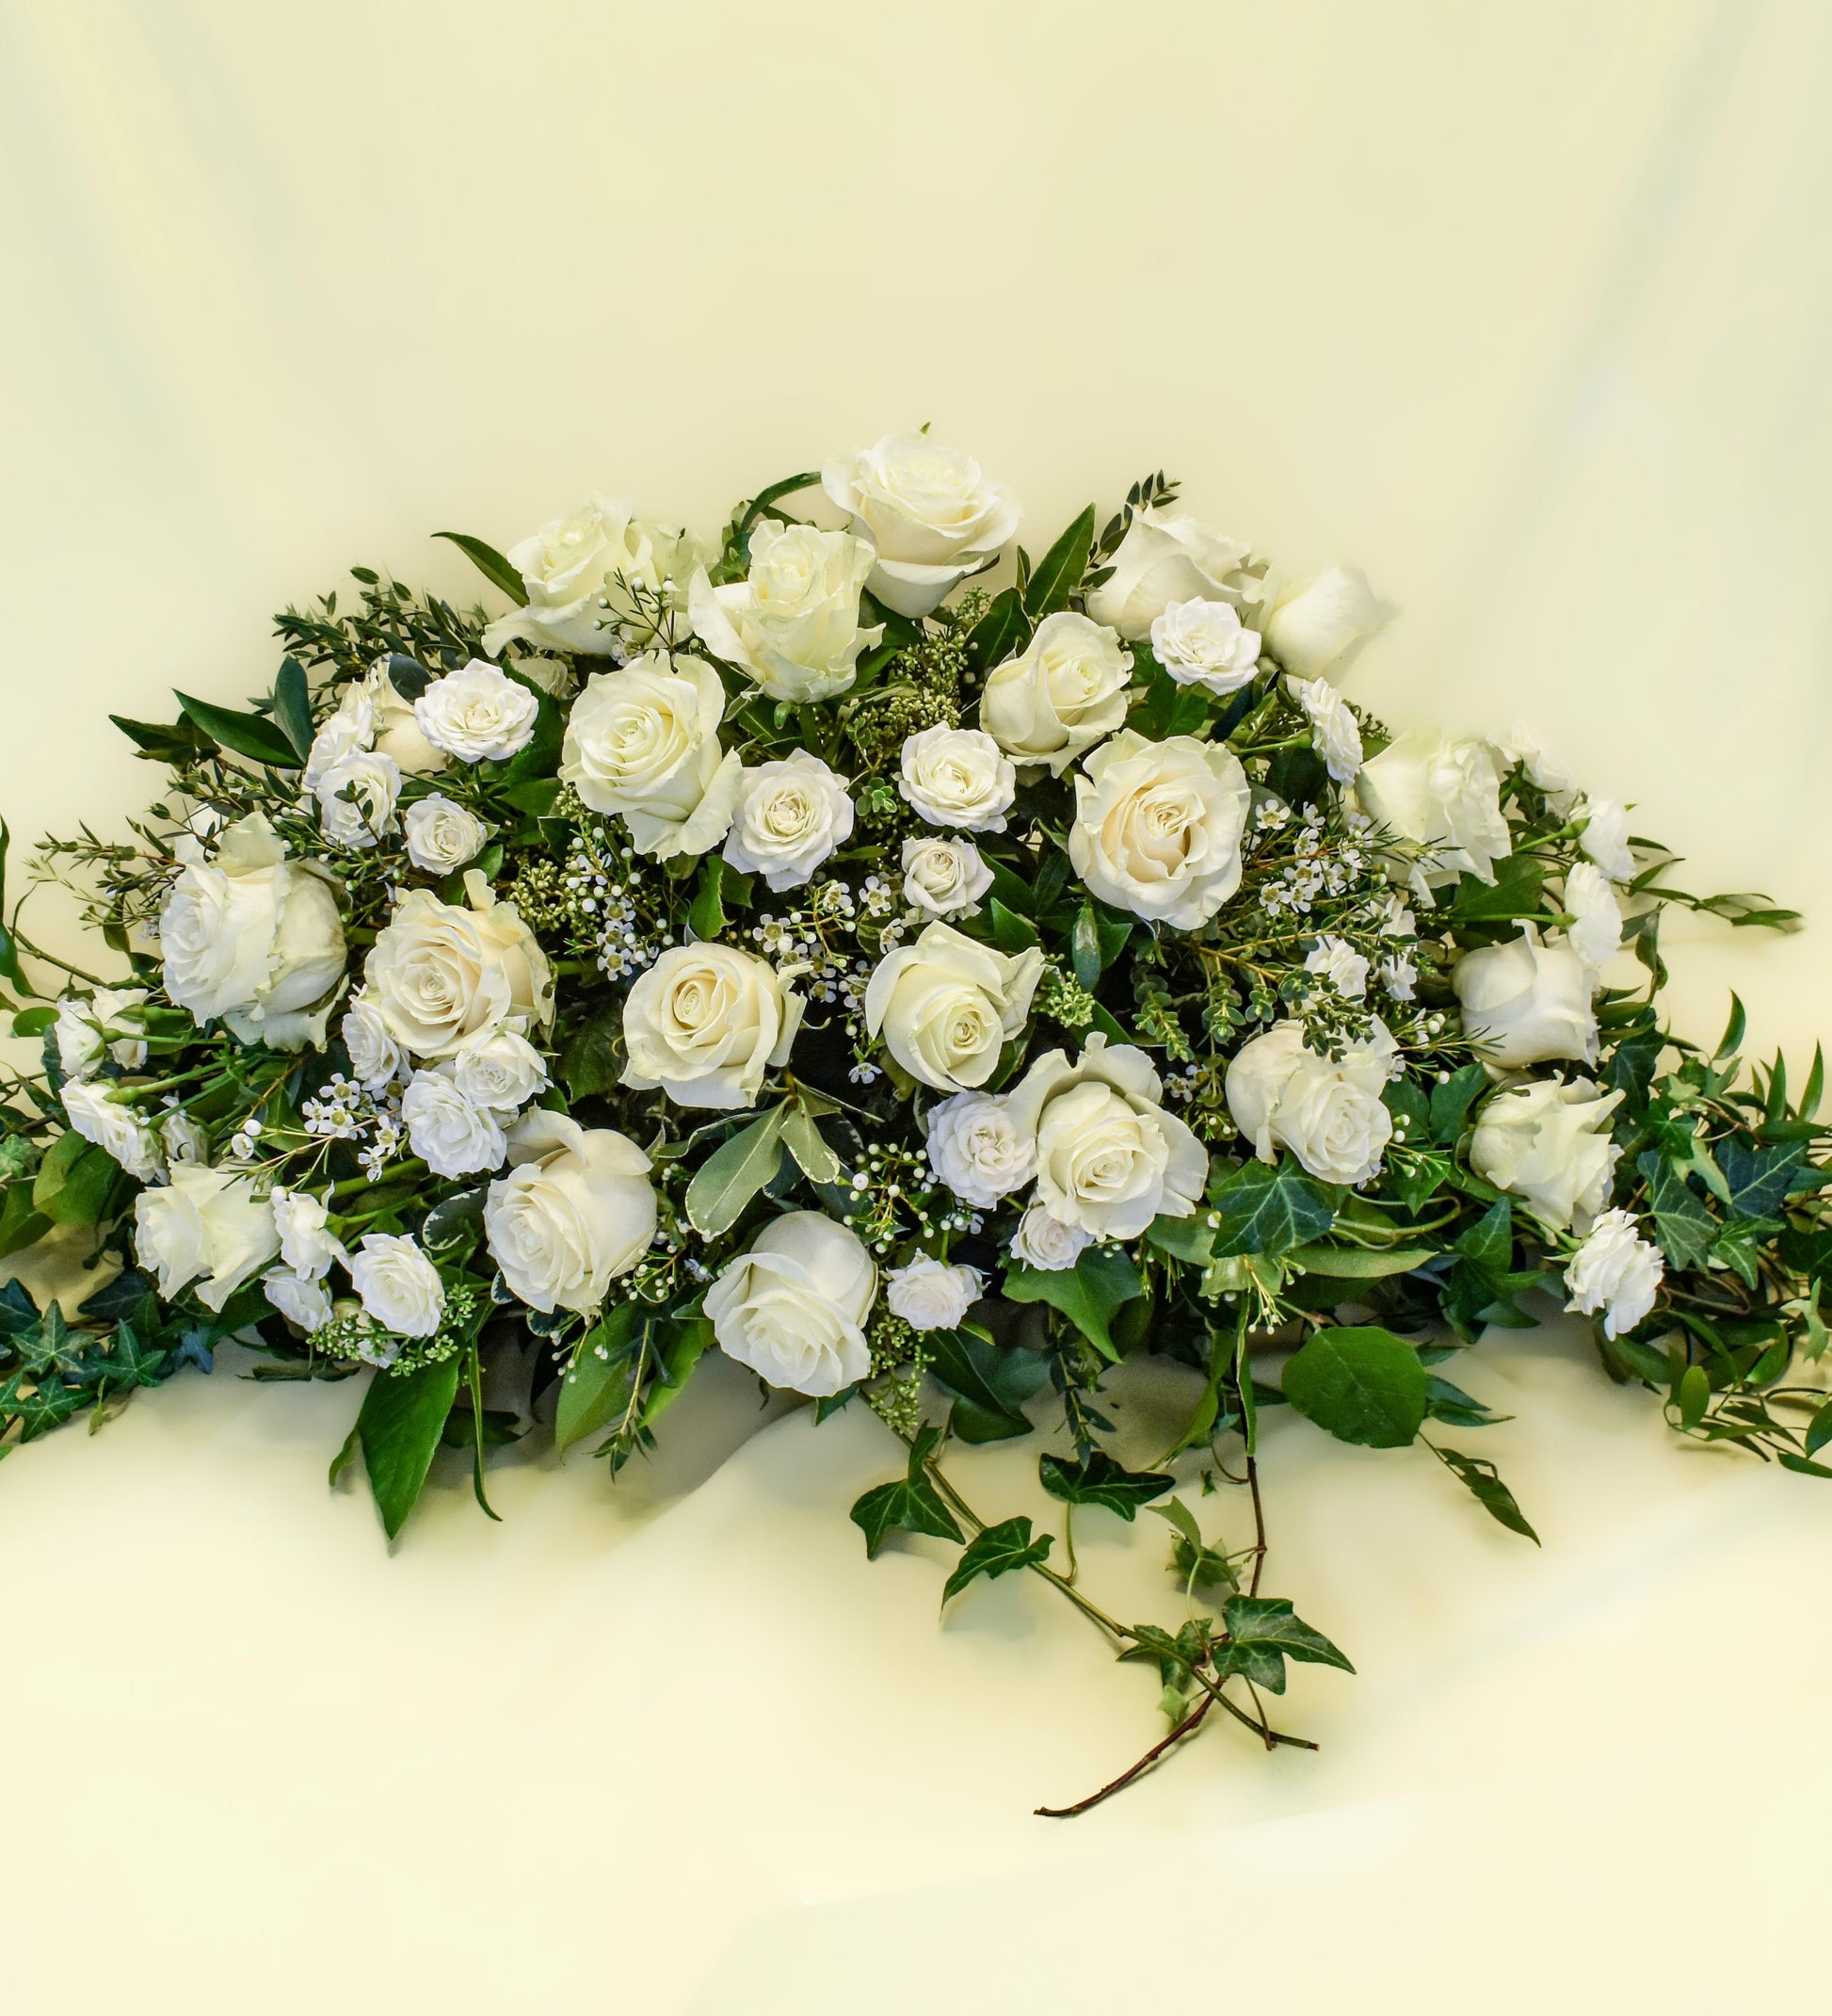 White roses and spray roses arranged with white wax flower and greens in a casket spray